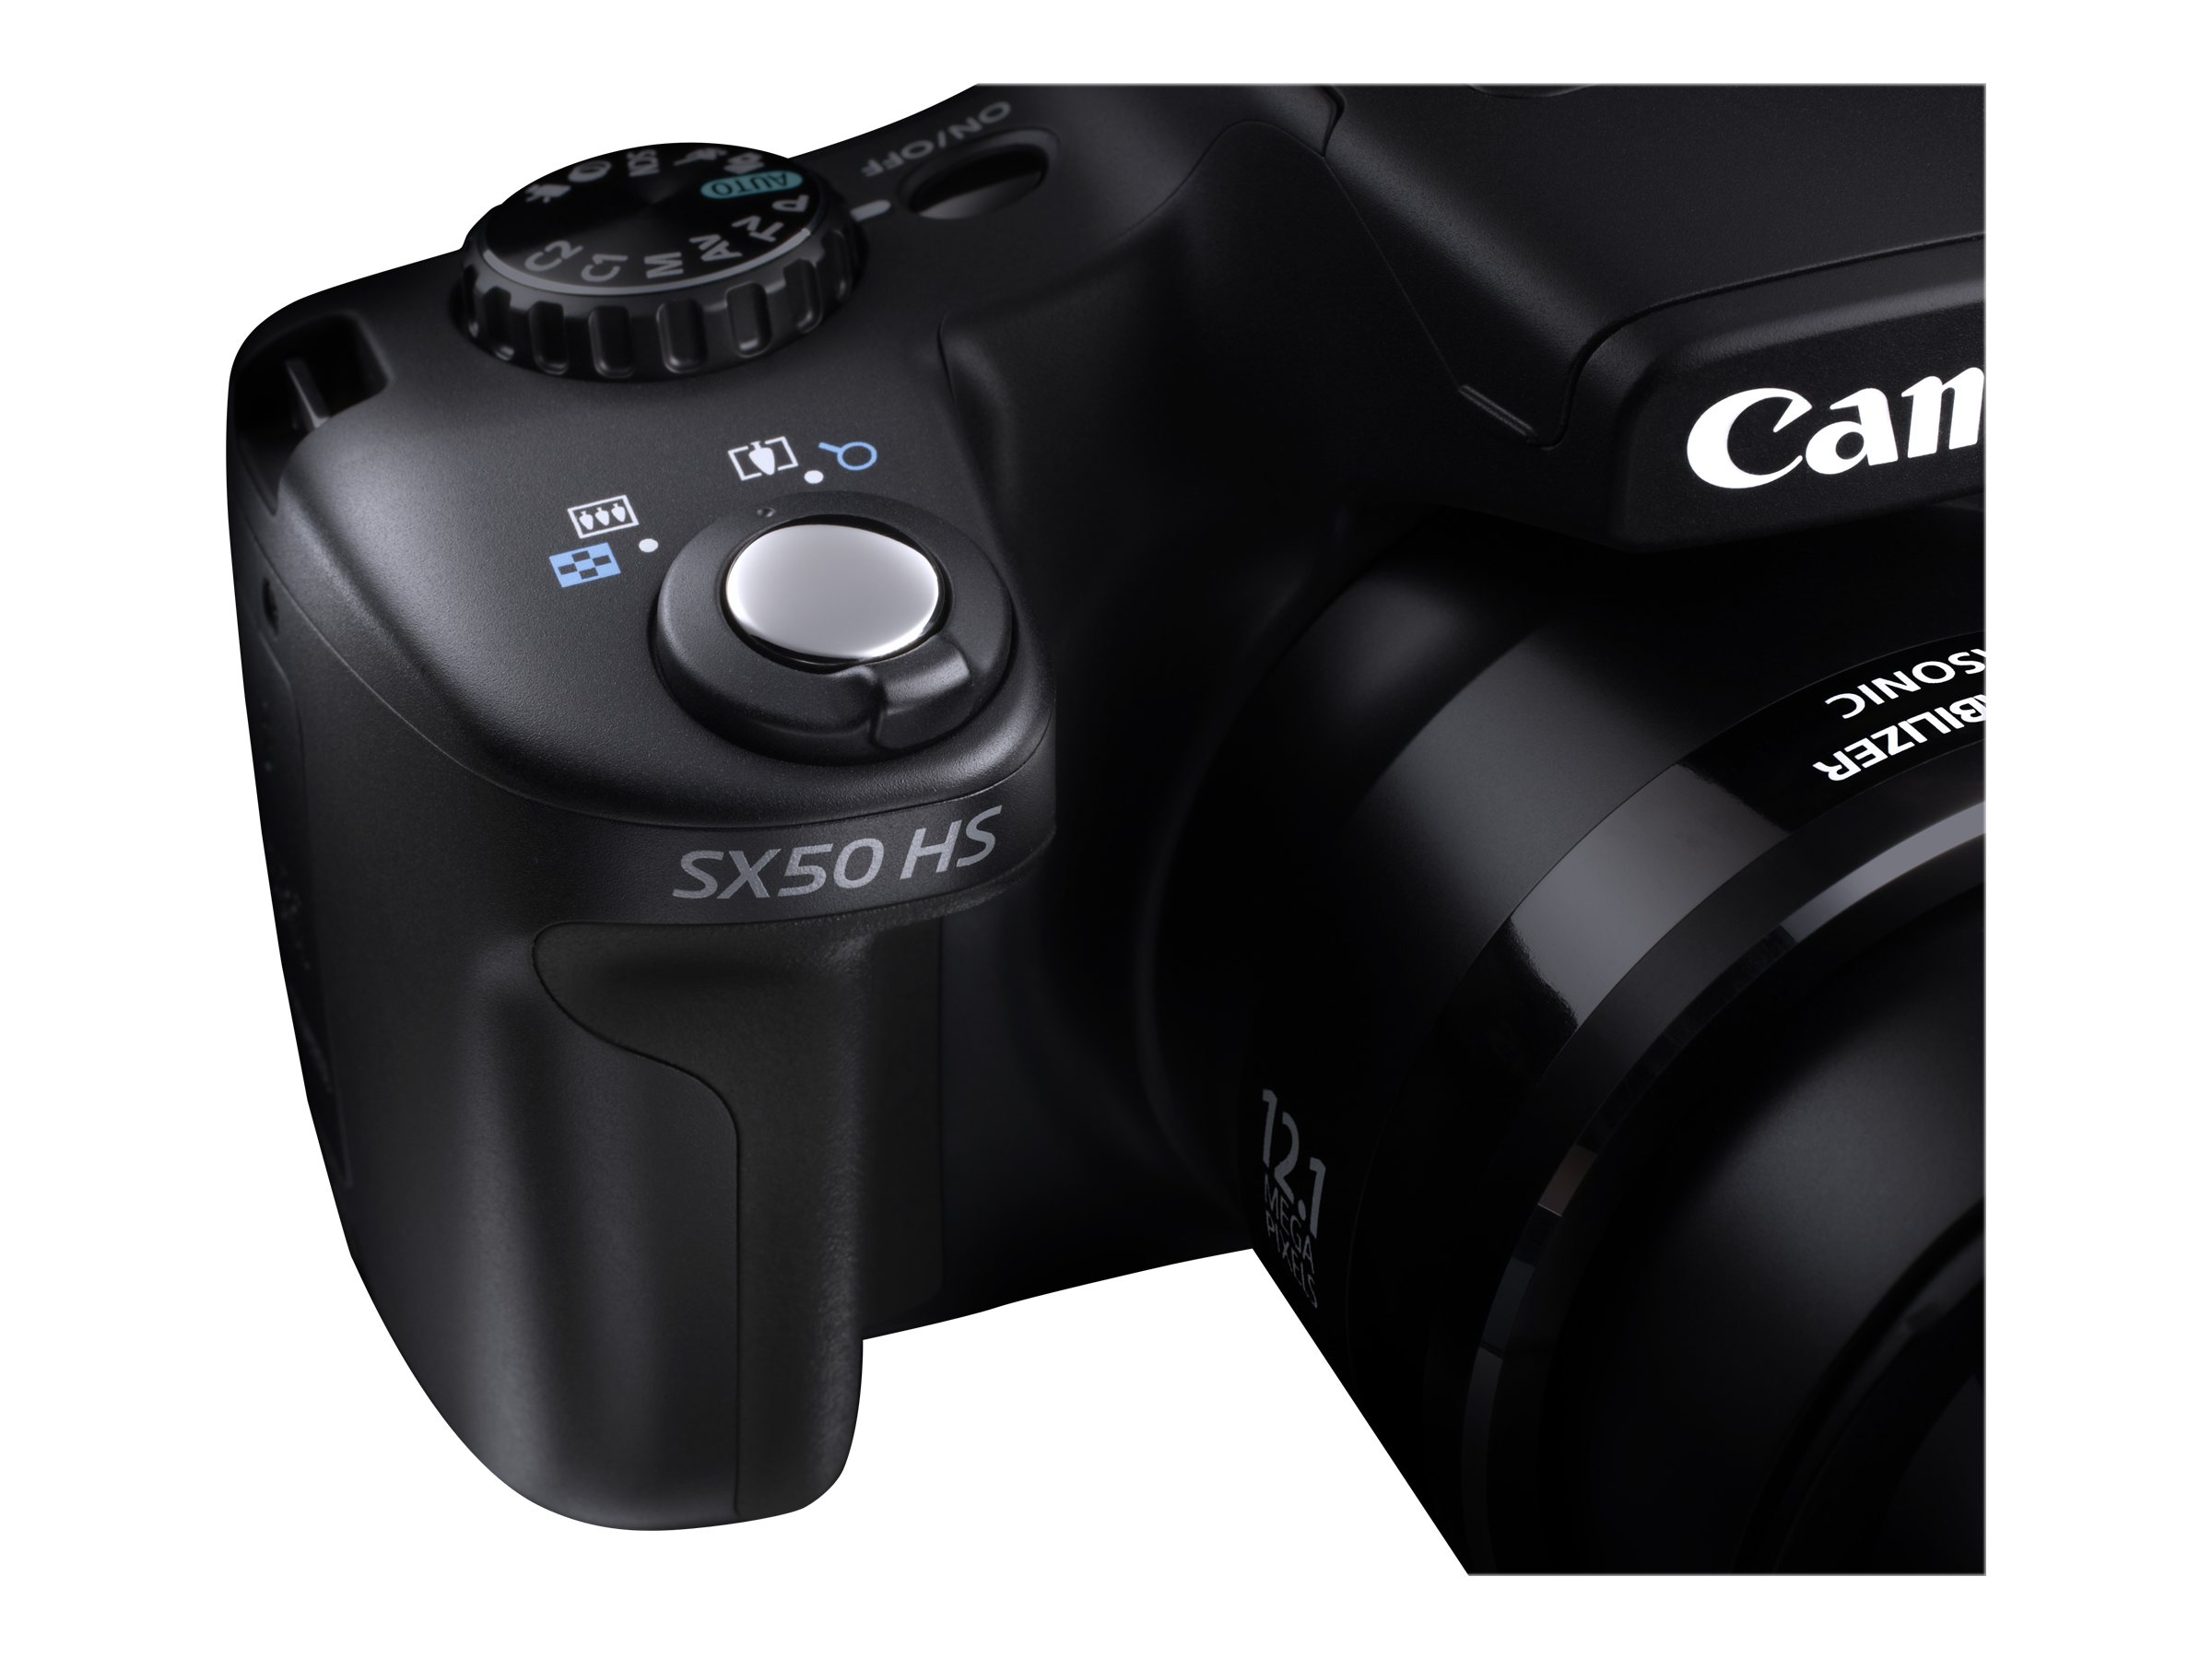 Canon PowerShot SX50 HS - Digital camera - compact - 12.1 MP - 1080p - 50x optical zoom - image 10 of 15